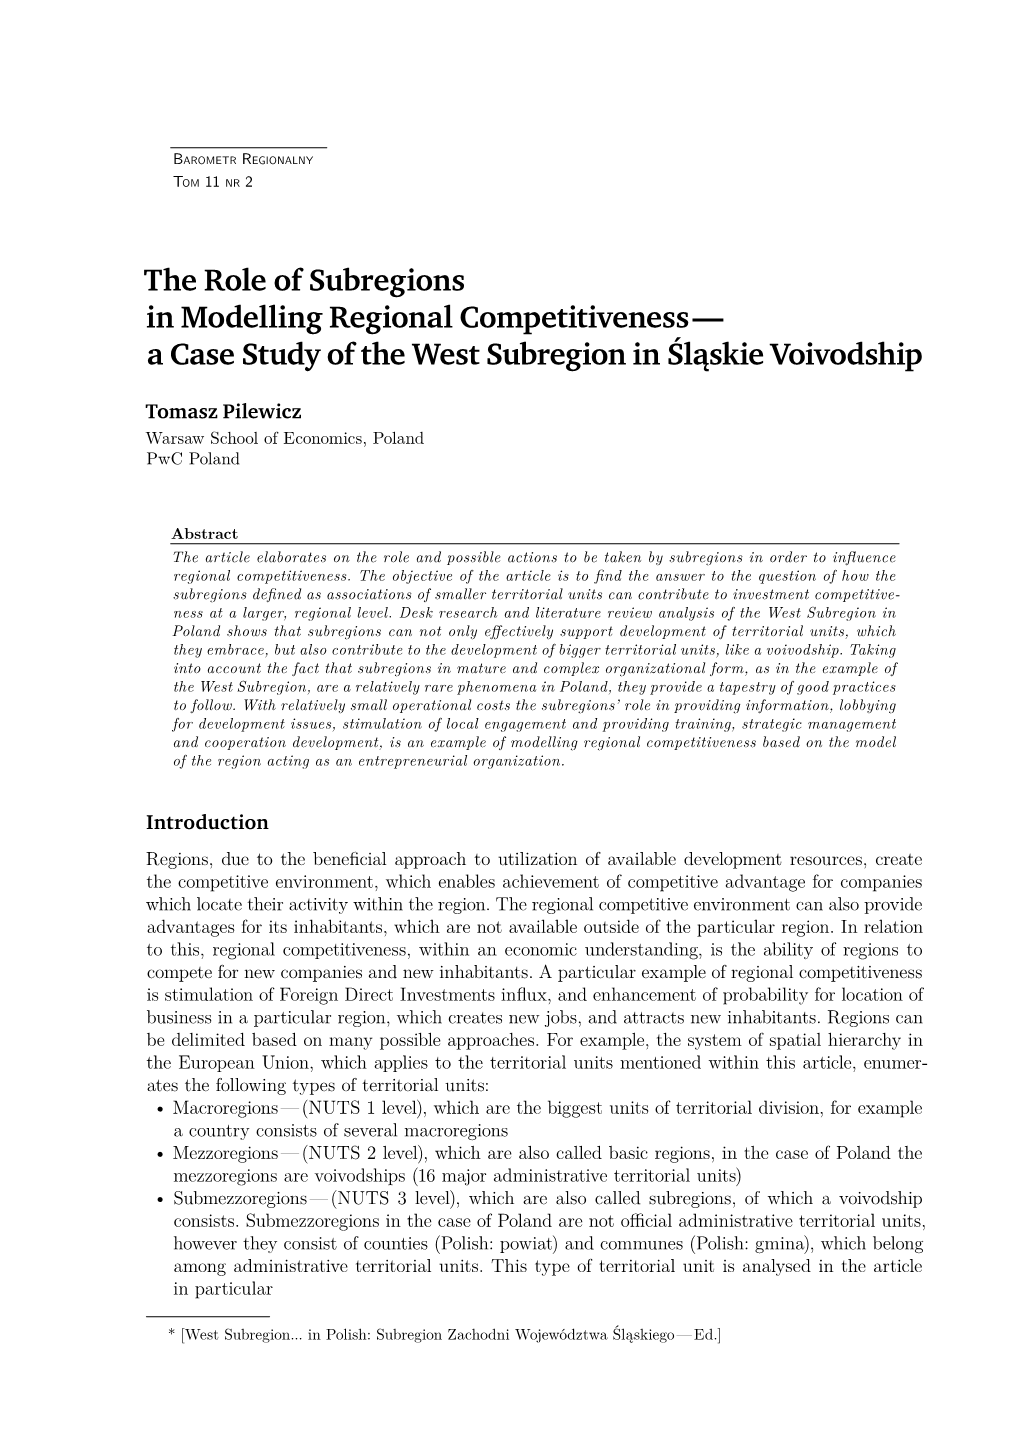 The Role of Subregions in Modelling Regional Competitiveness — a Case Study of the West Subregion in Śląskie Voivodship